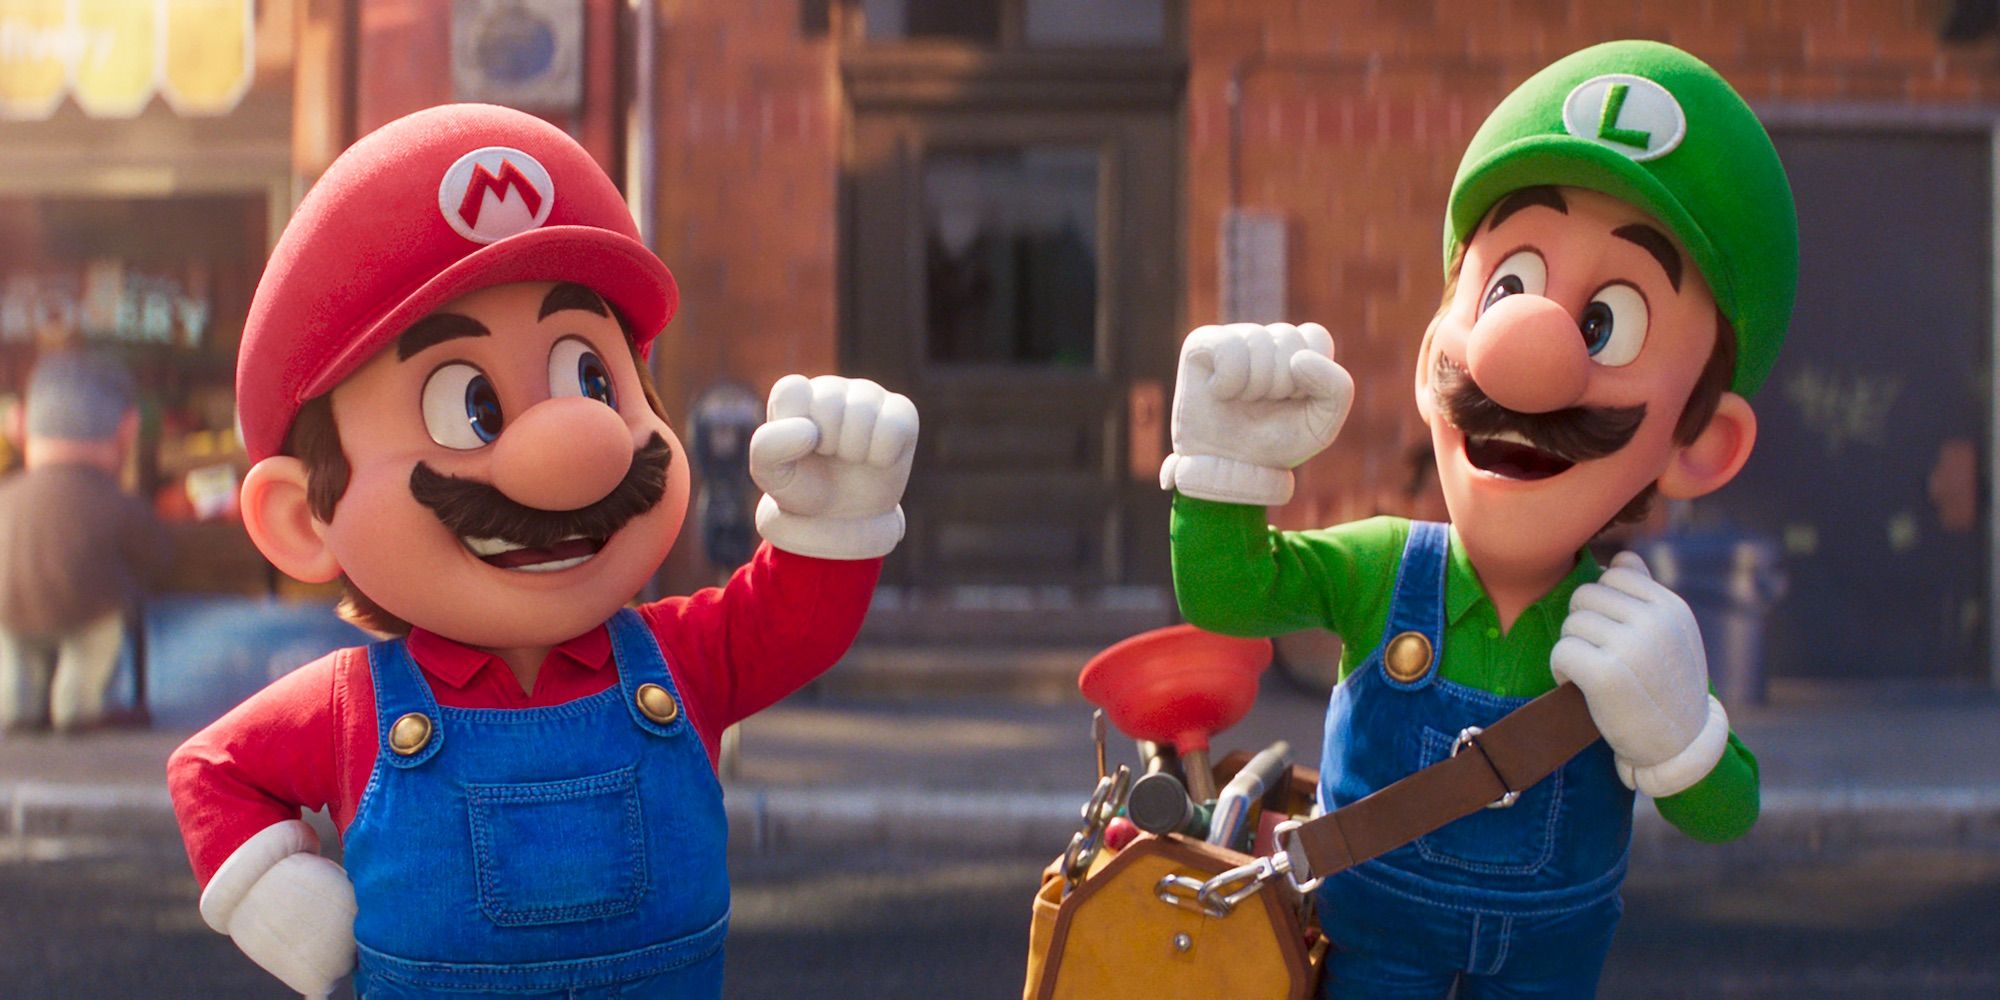 Mario and Luigi raises their fist and smile at each other in Super Mario Bros Movie